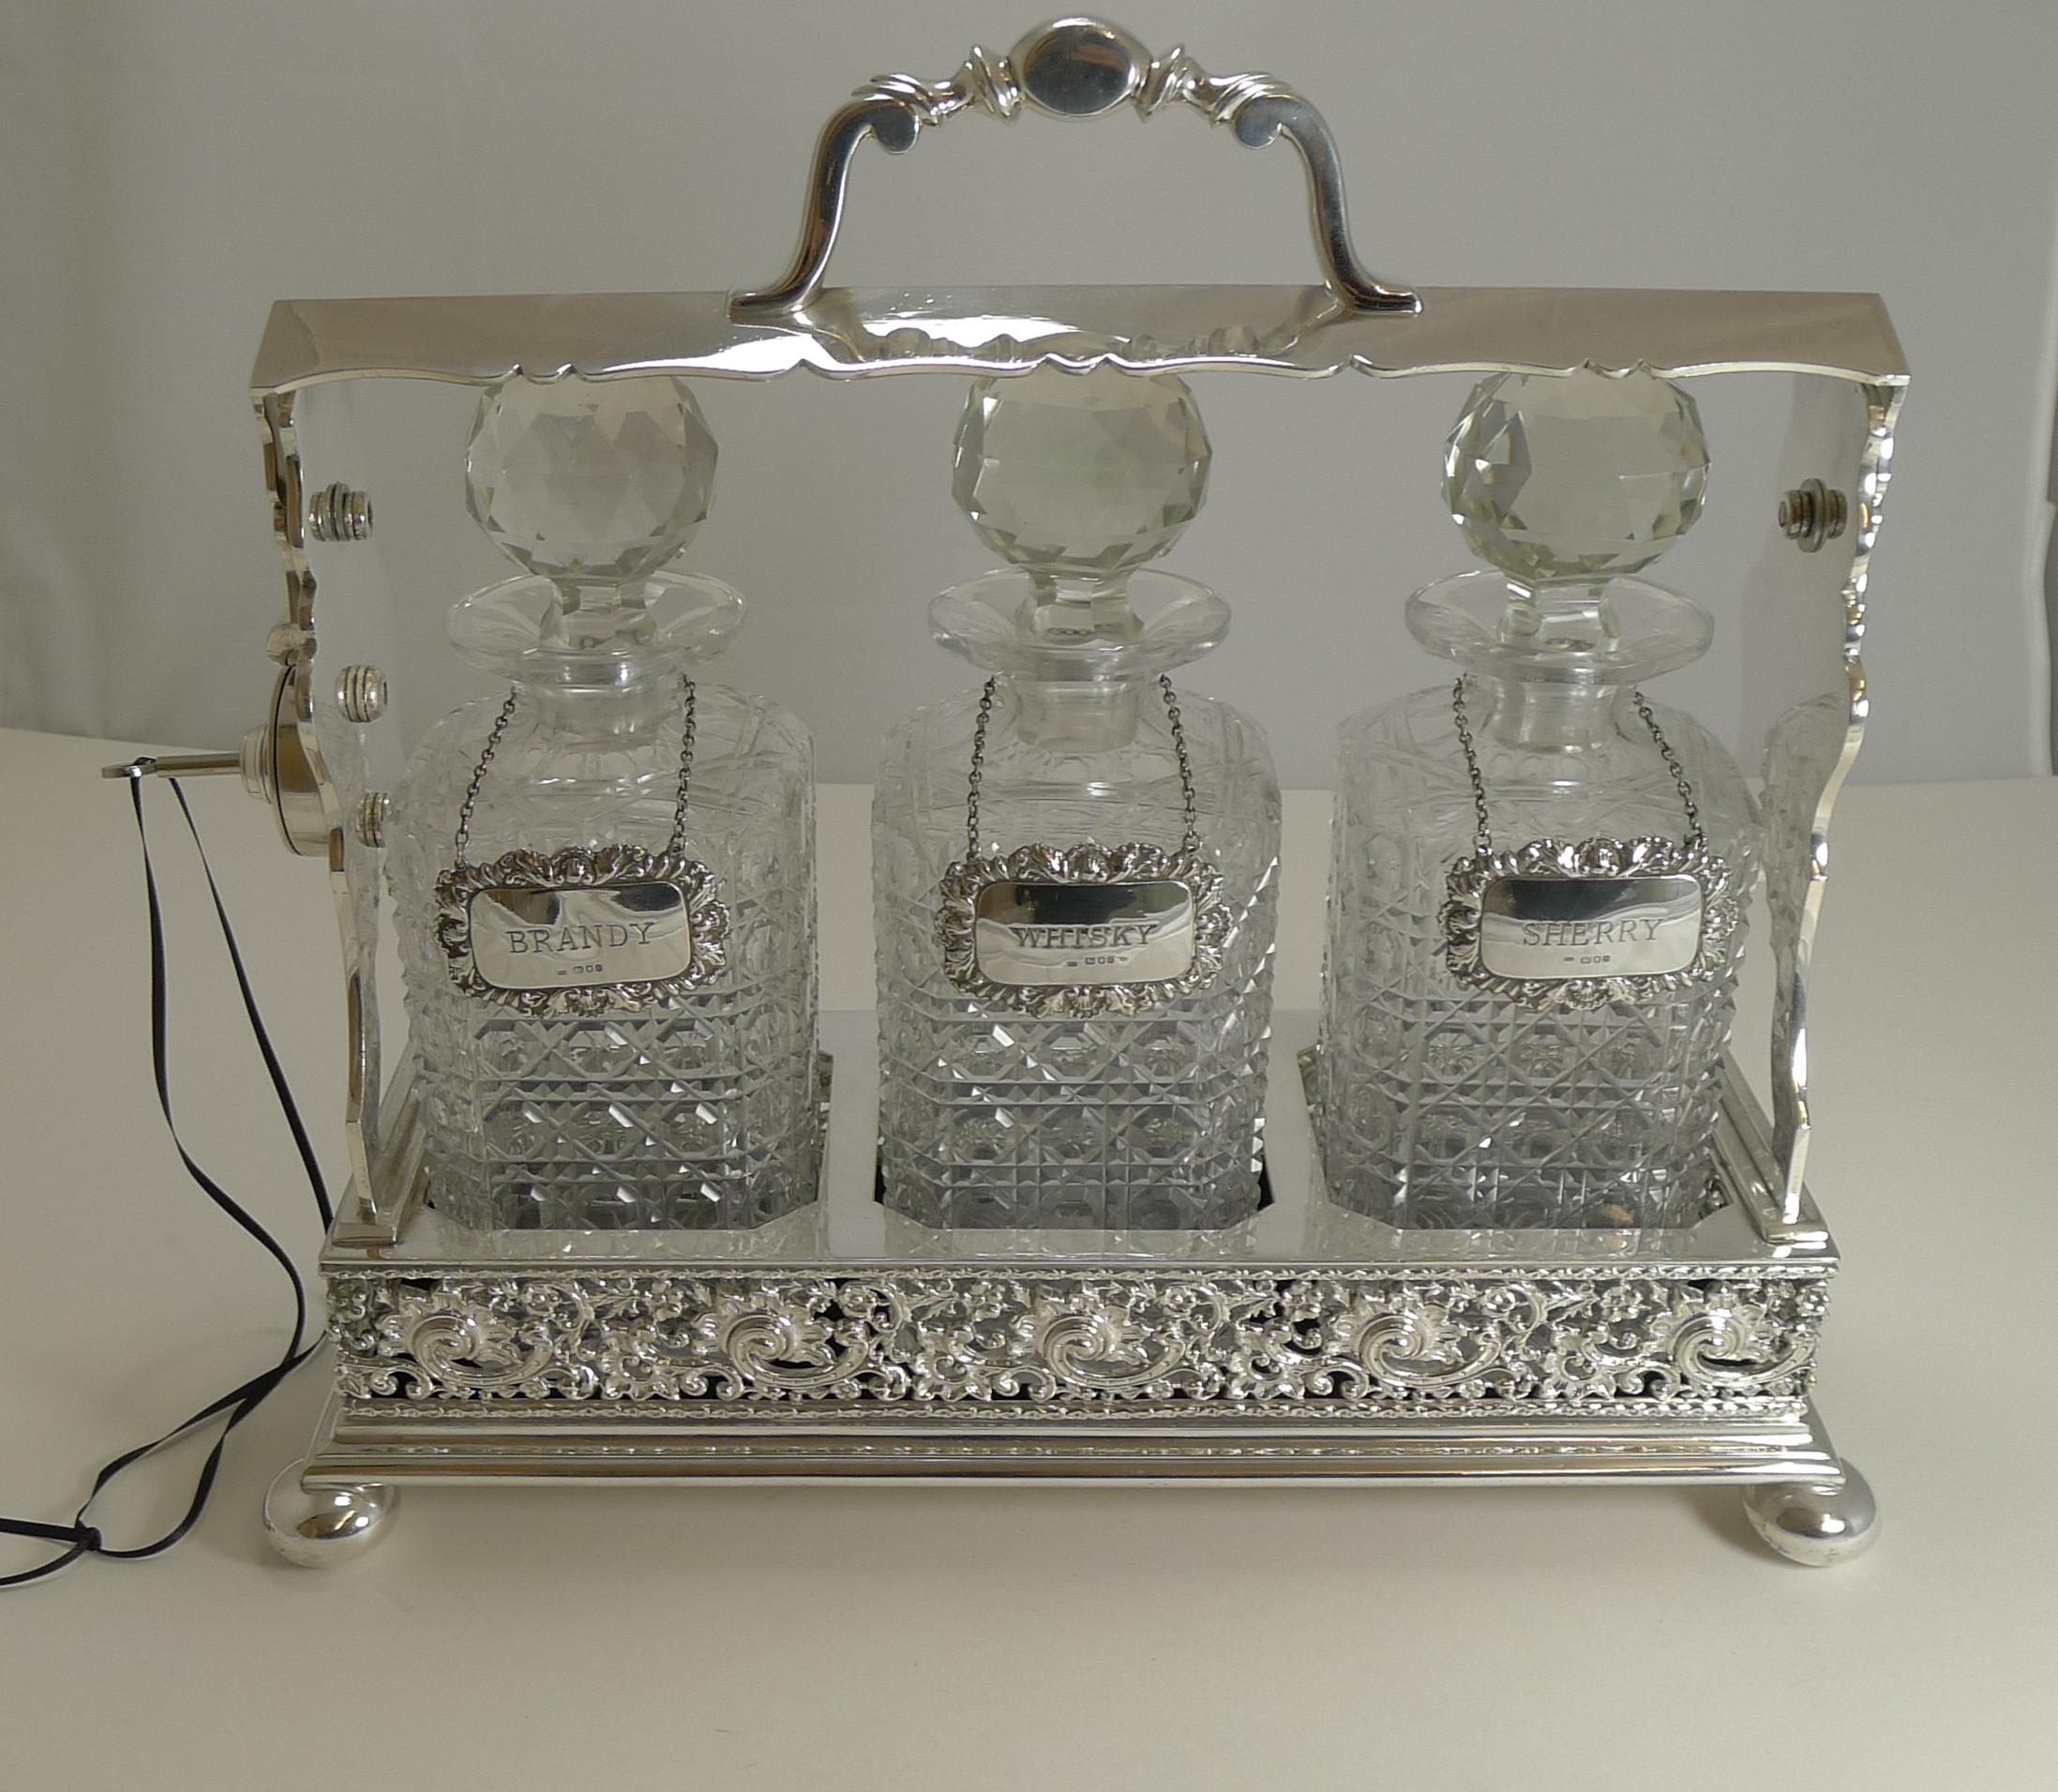 A smart late Victorian three bottle Tantalus with three cut crystal decanters in the ever-popular hobnail design.

The frame is most unusual with a cast pierced or reticulated base. Once unlocked, the barrel is slid down to release the bar